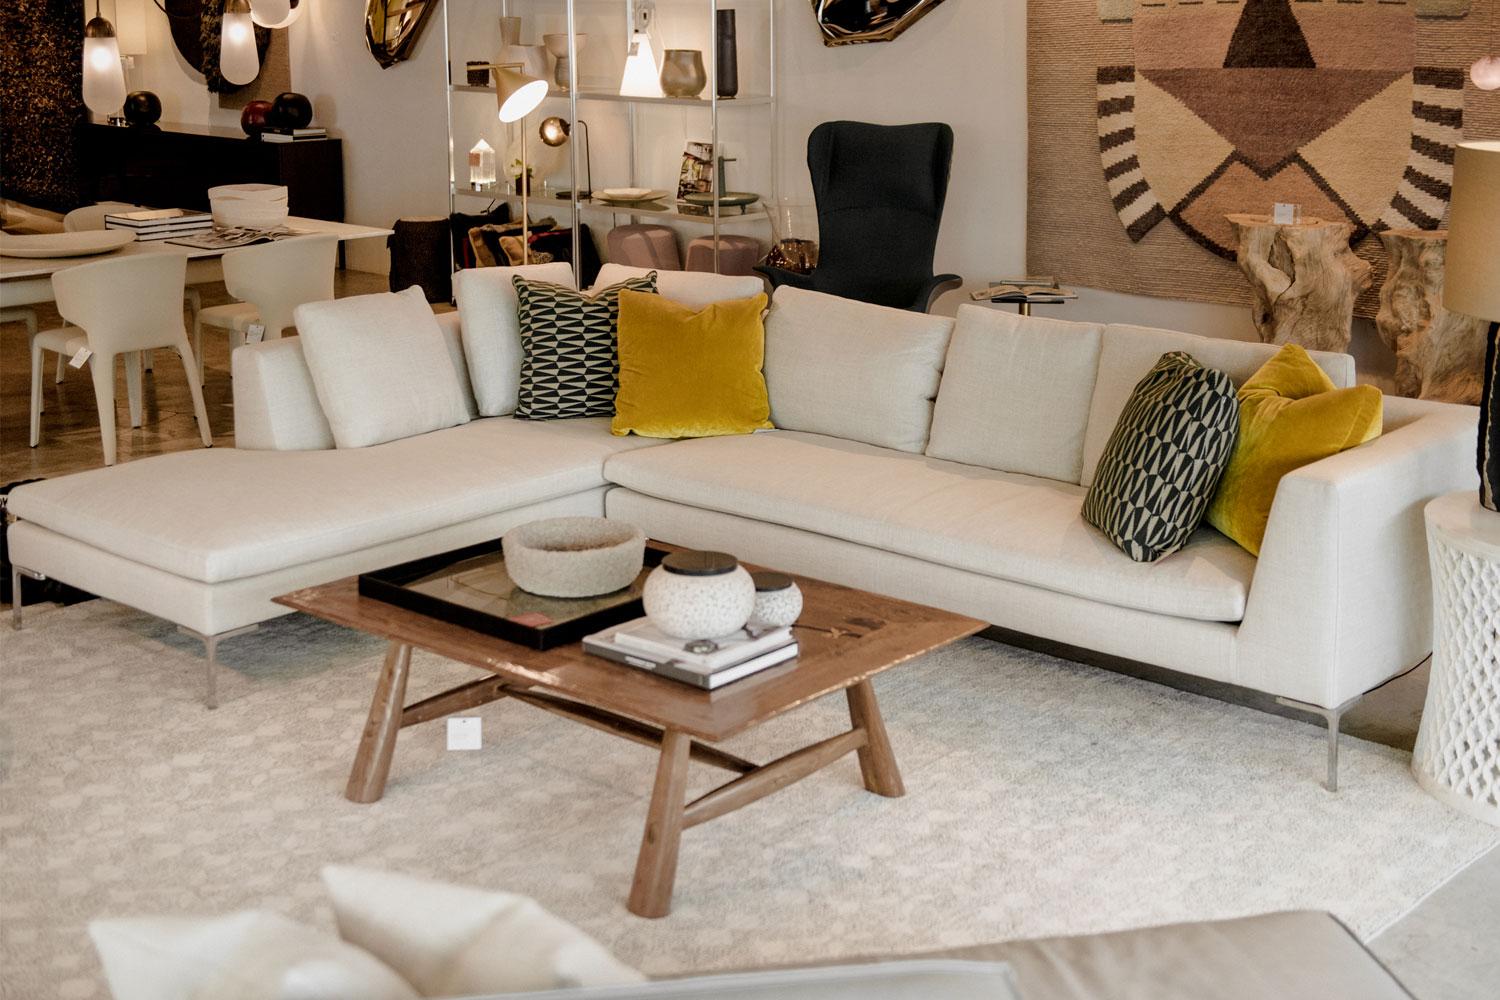 The design of this Charles Left-Facing Sectional, designed by Antonio Citterio for B&B Italia is airy and simple in profile and detail. The “inverted “L”- shaped feet, along with a single seat-cushion and a series of free cushions placed on the